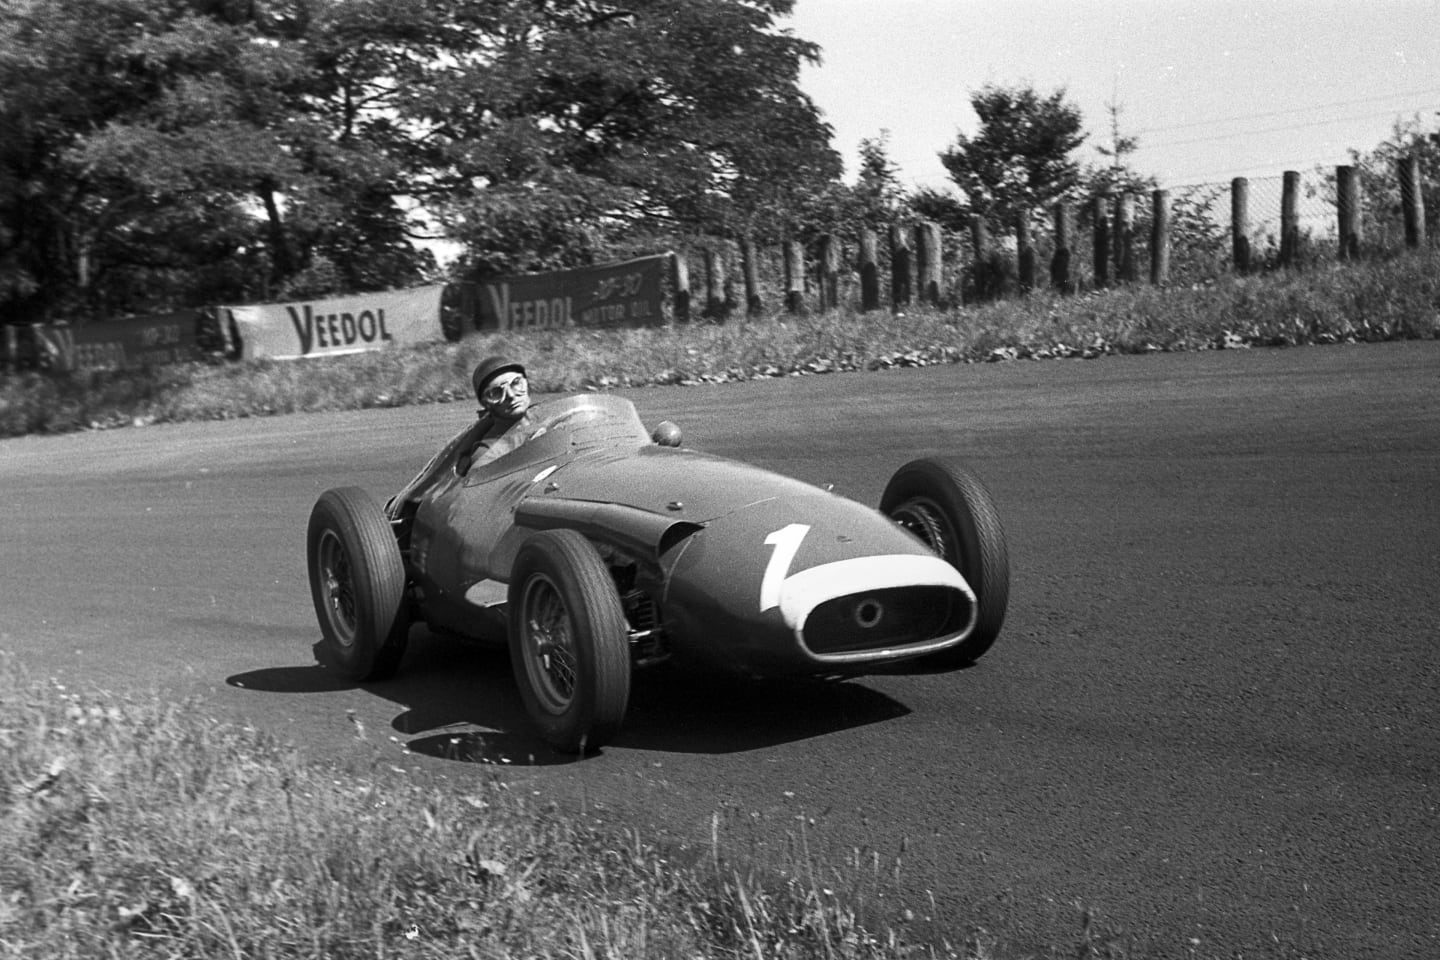 Juan Manuel Fangio, Maserati 250F, Grand Prix of Germany, Nurburgring, 04 August 1957. (Photo by